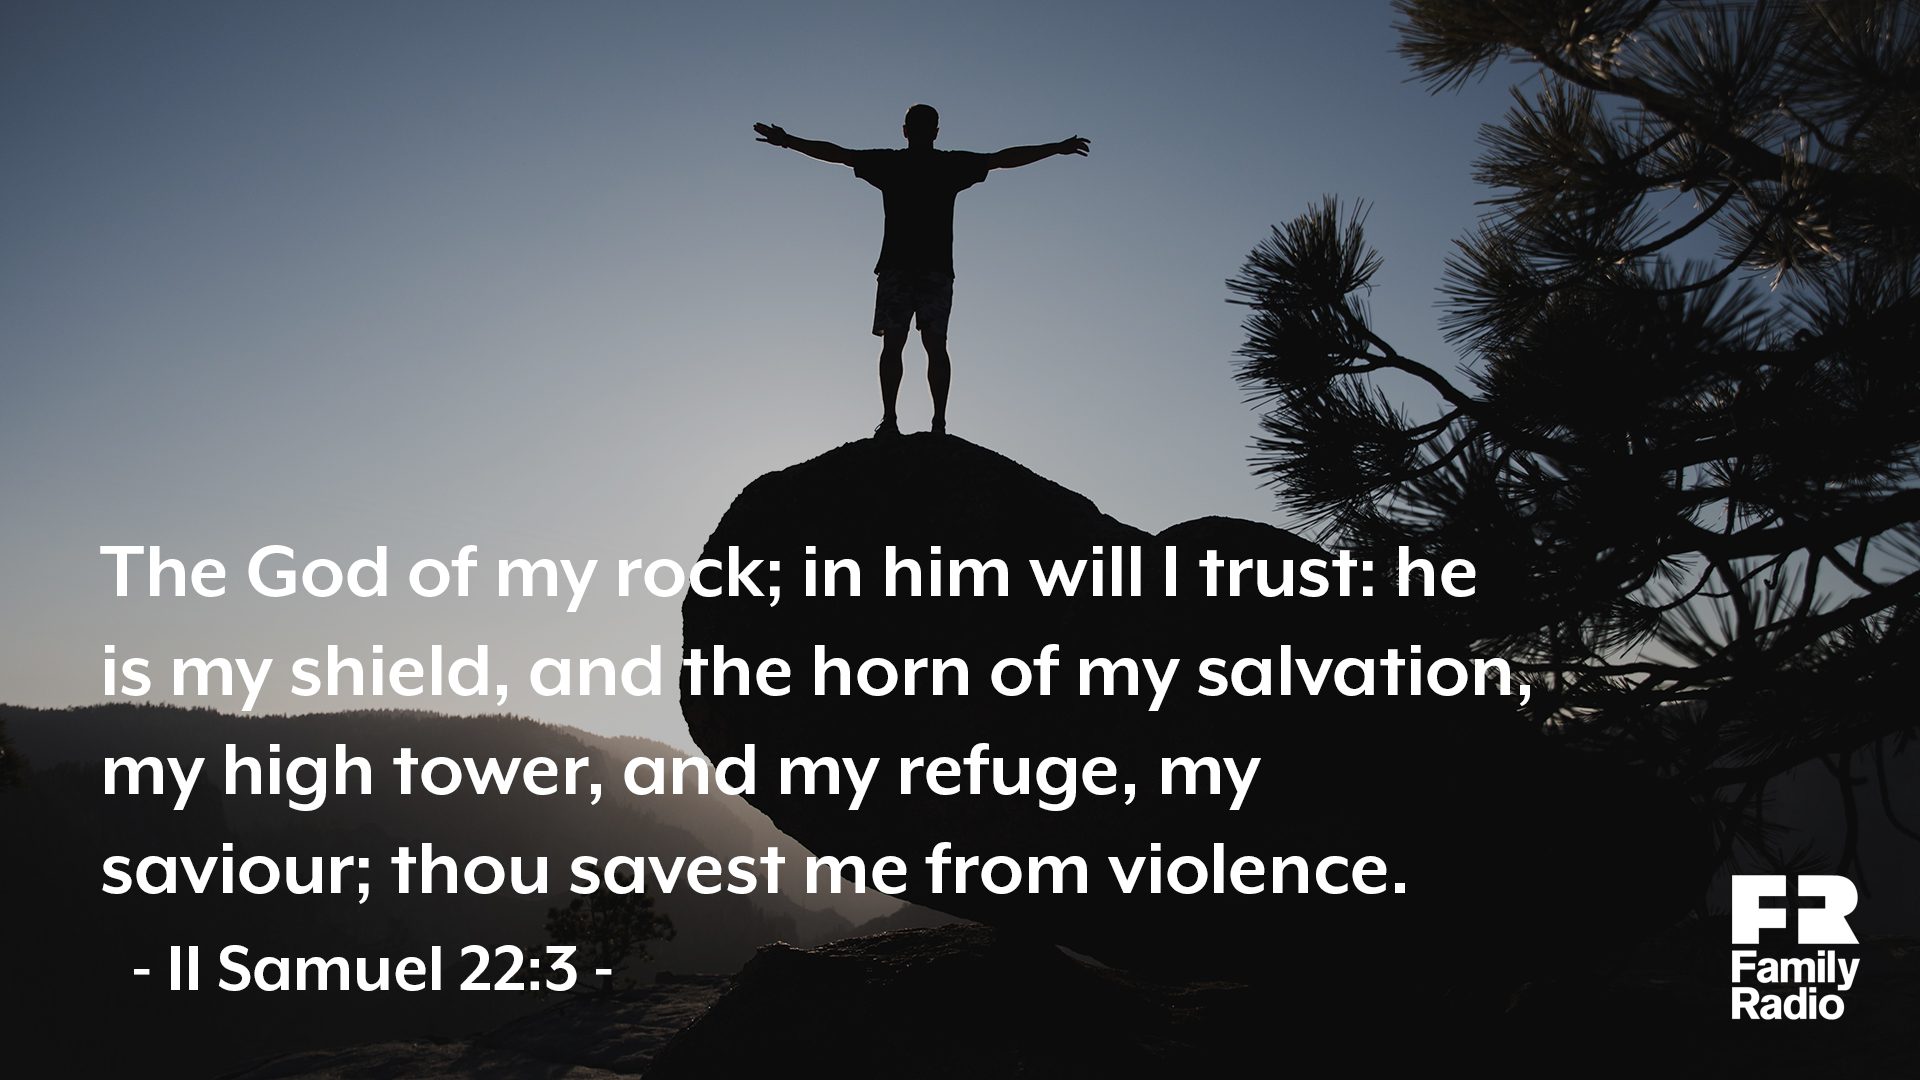 "The God of my rock; in him will I trust: he is my shield, and the horn of my salvation, my high tower, and my refuge, my savior; thou savest me from violence."